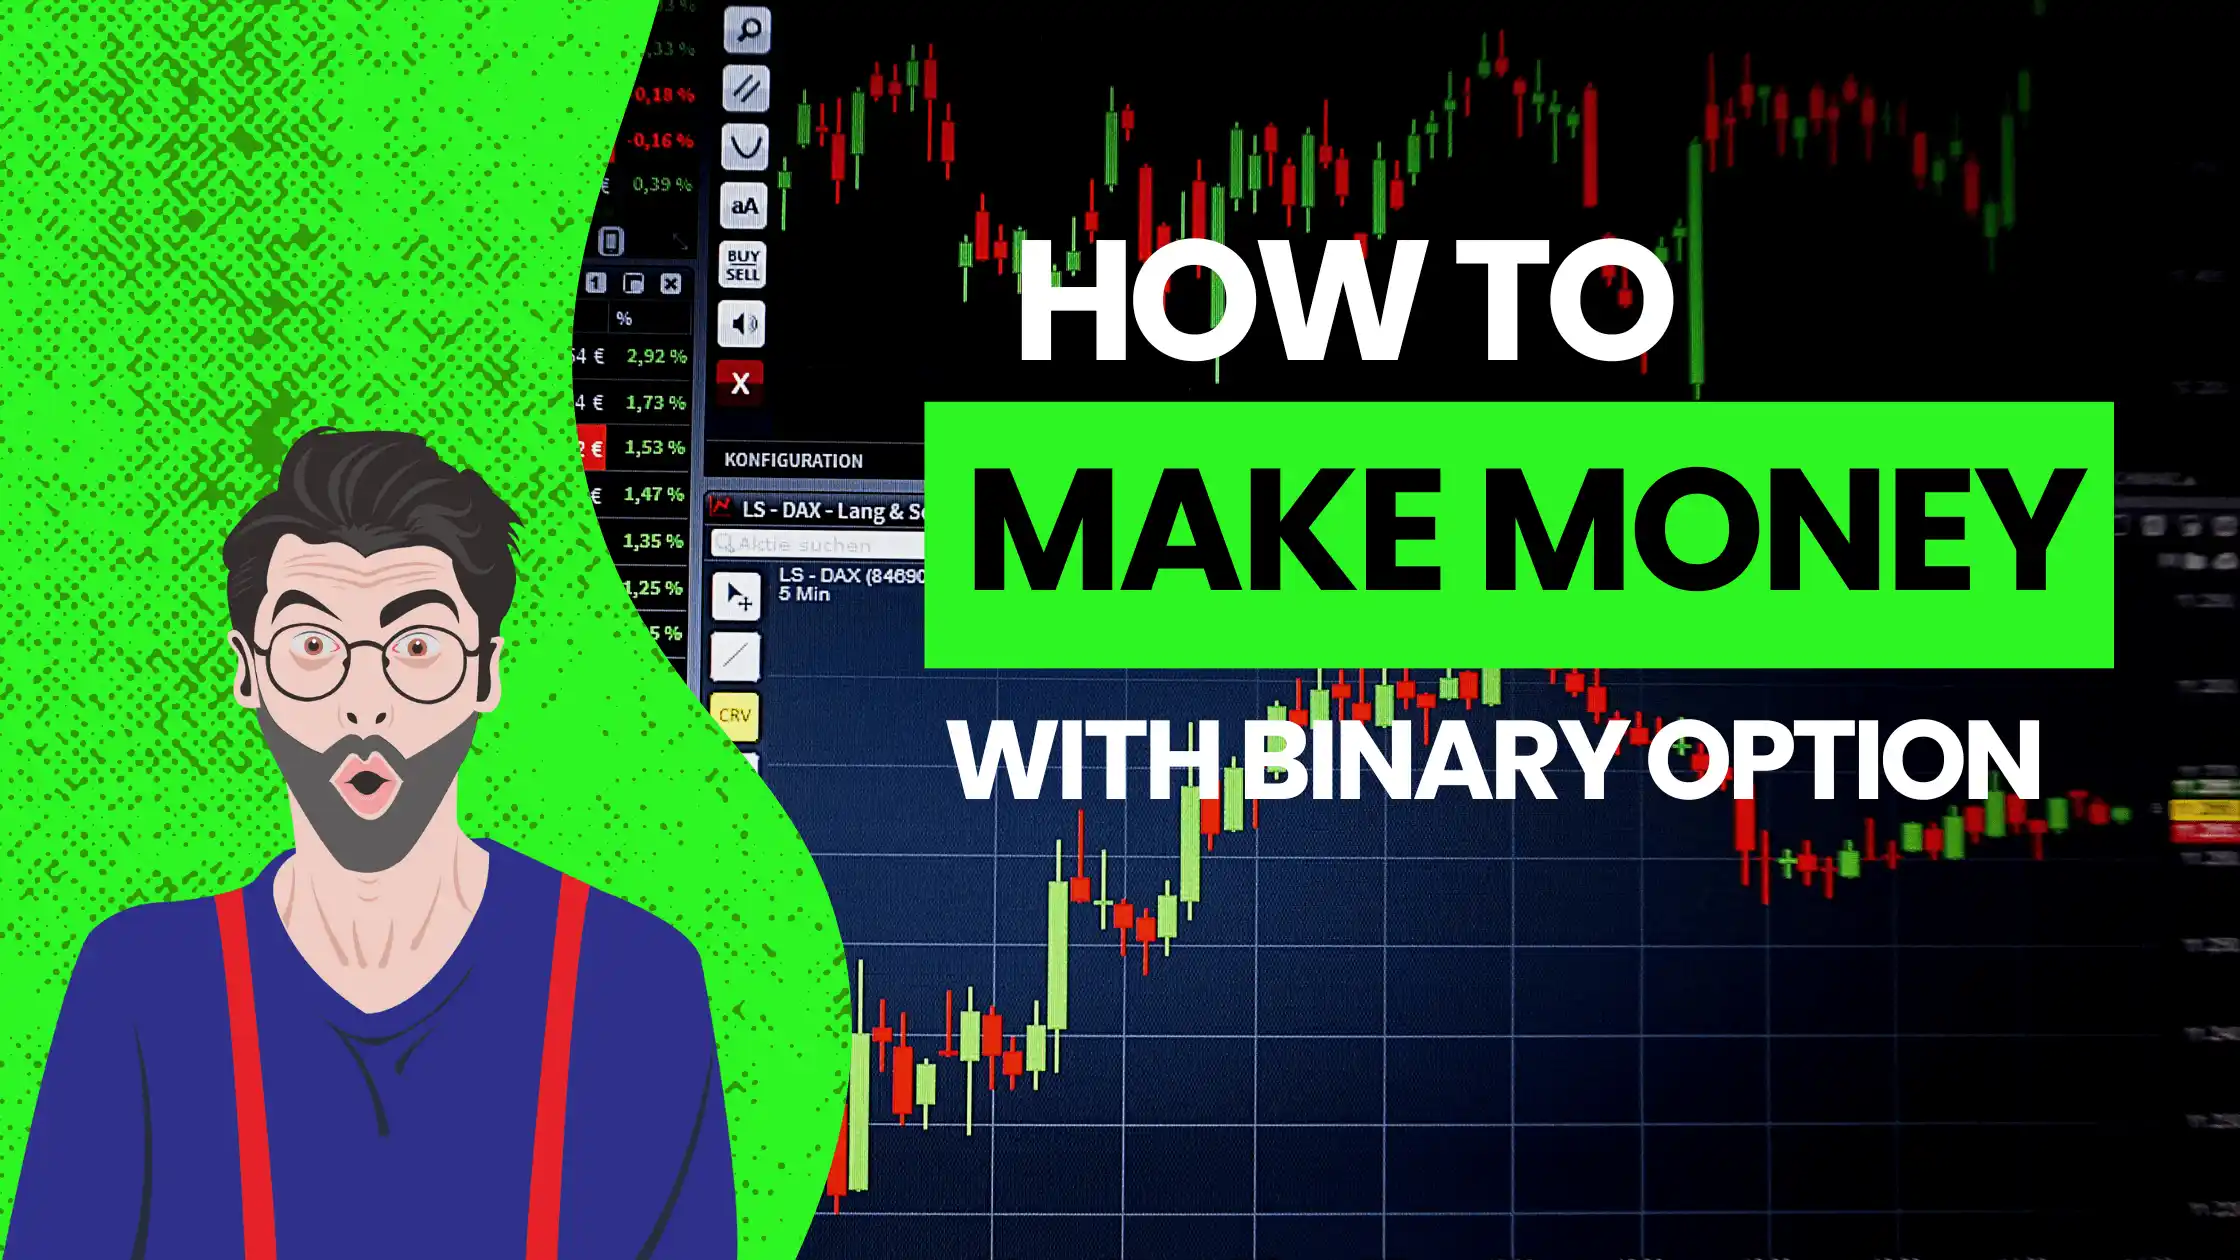 How To Make Money with Binary Option